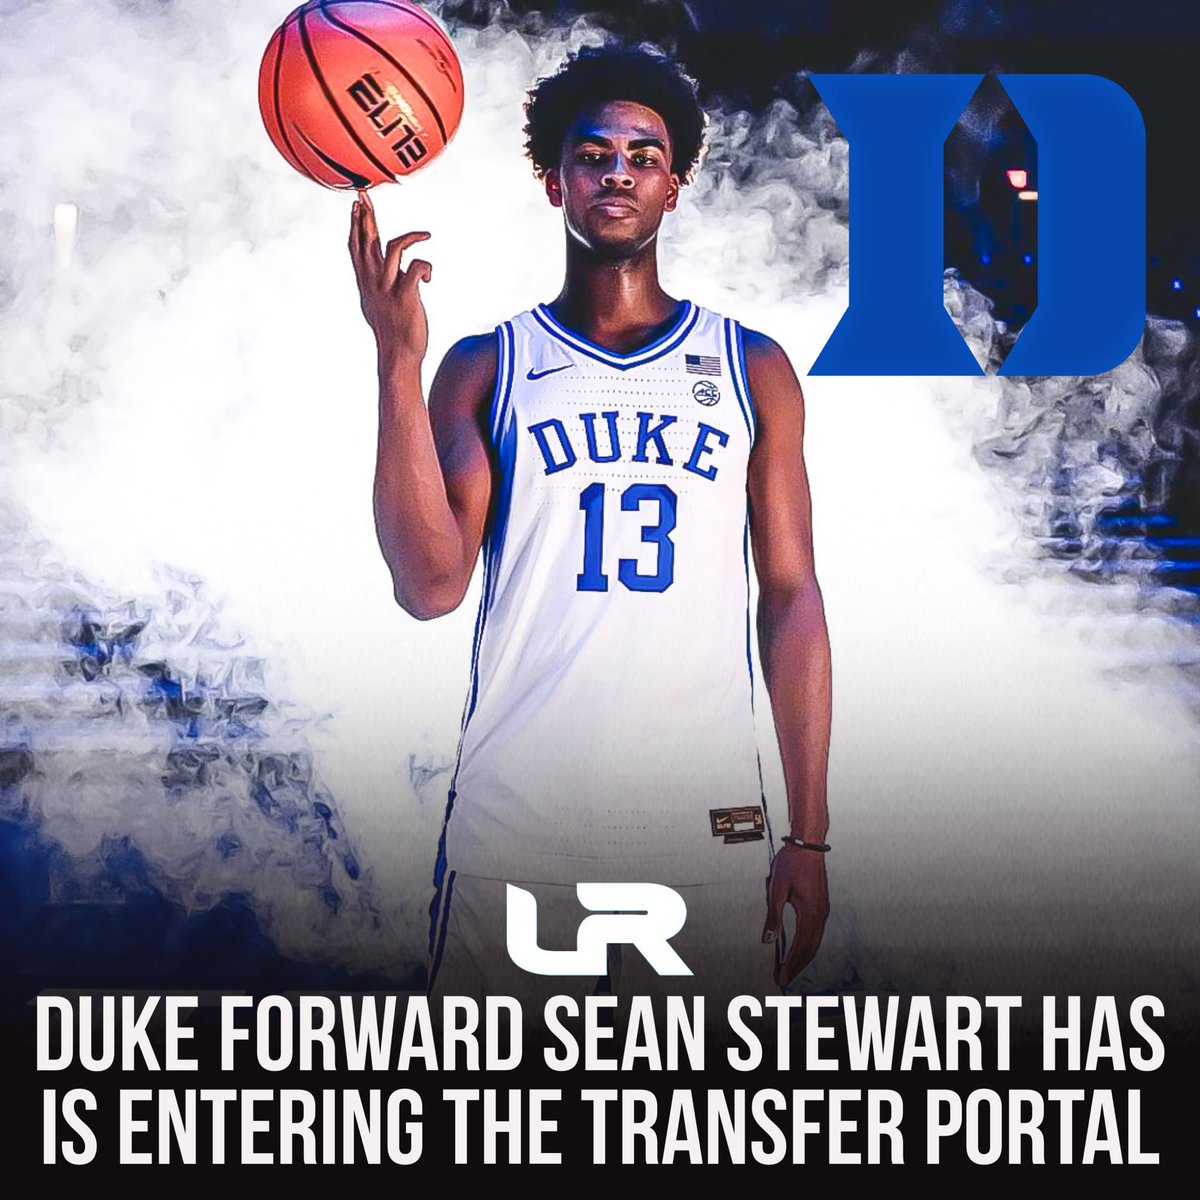 NEWS: Duke forward Sean Stewart is entering the transfer portal, a source tells @LeagueRDY. Stewart is a former 5⭐️ recruit and McDonald’s All-American who played just one season at Duke. He’s a native of Windermere, Florida. He averaged 2.6PPG and 3.2RPG in only 8MPG this